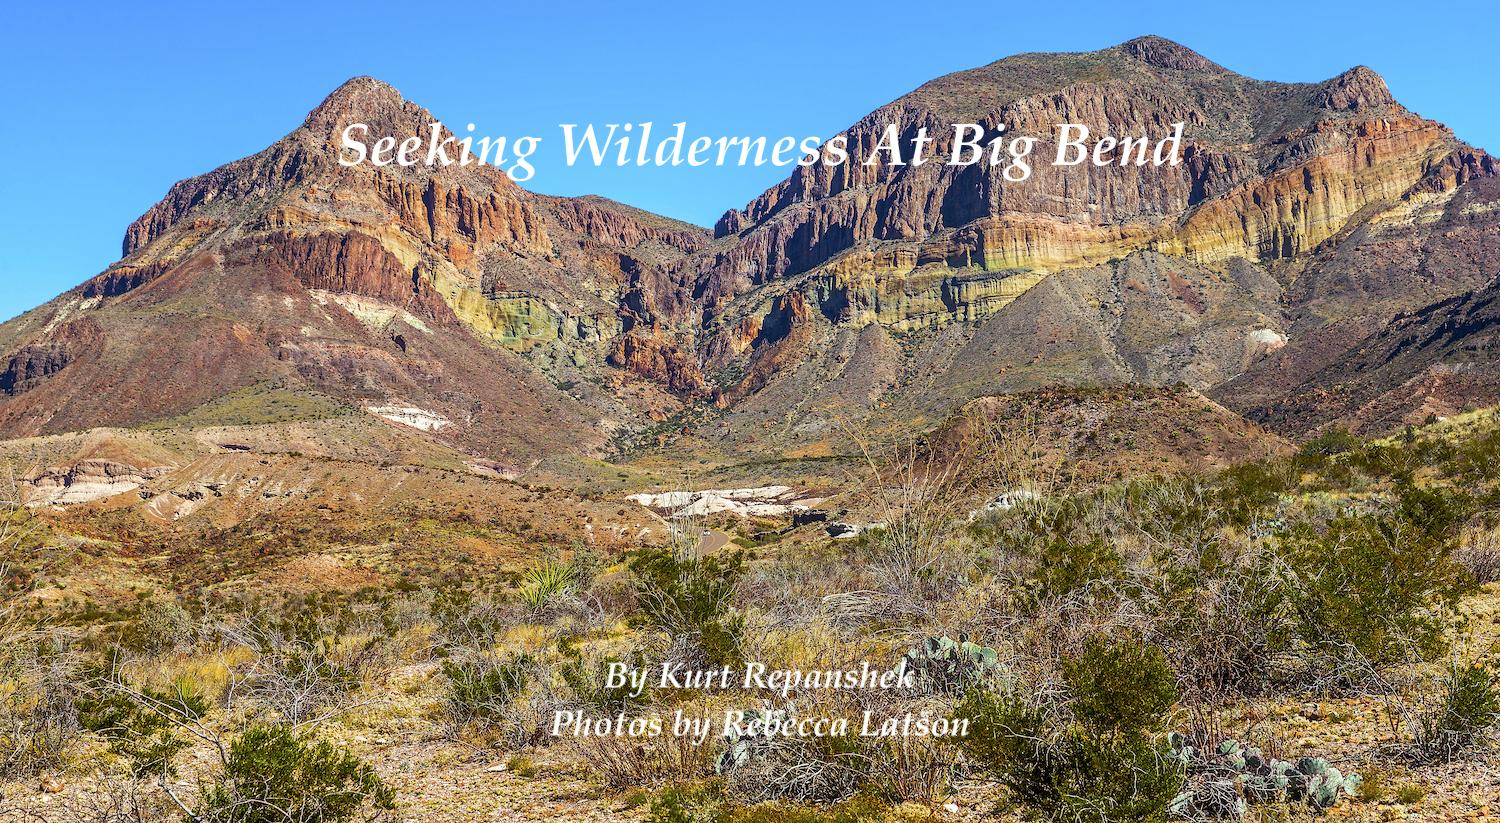 A grassroots effort is under way to see official wilderness designation bestowed in parks of Big Bend National Park/Rebecca Latson